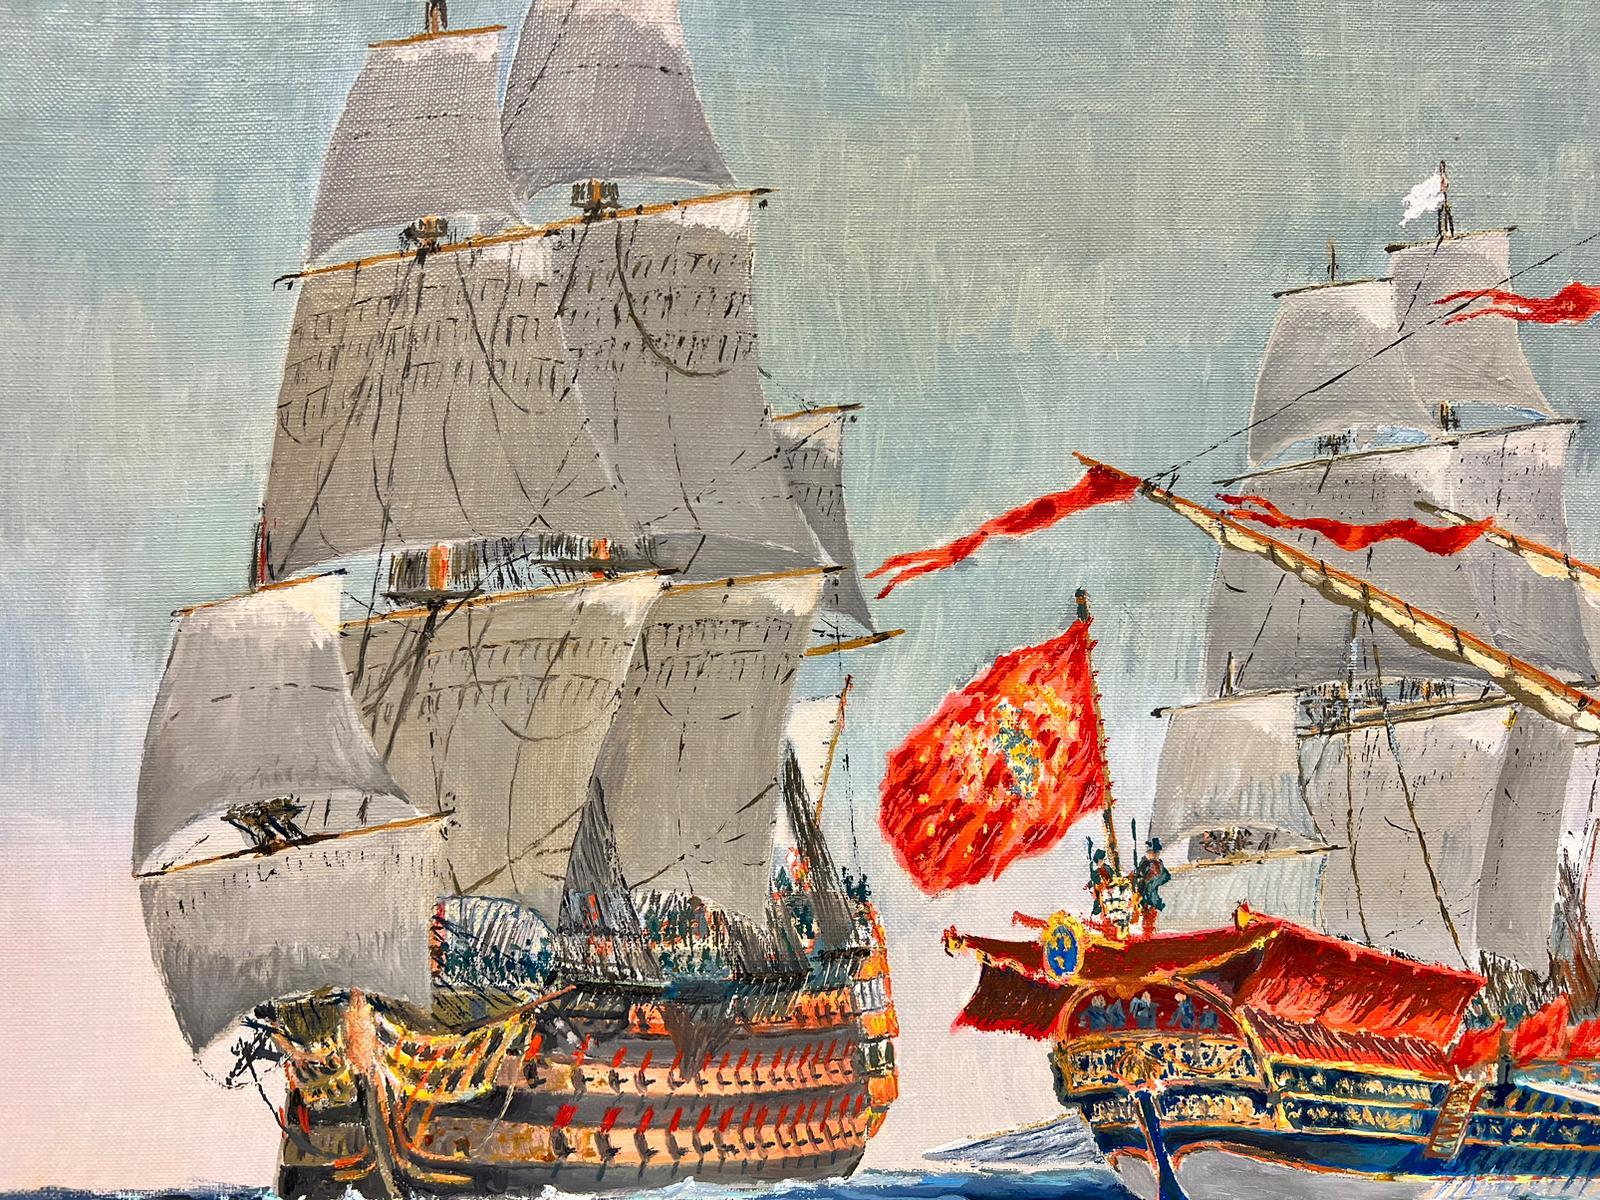 Artist/ School: Signed by Eug. Mavie. French 20th century

Title: Classical Warships at Sea. 

Medium: oil on canvas, unframed

Painting: 18 x 25.5 inches

Colours: Blue, red, orange, white and grey

Provenance: private collection,